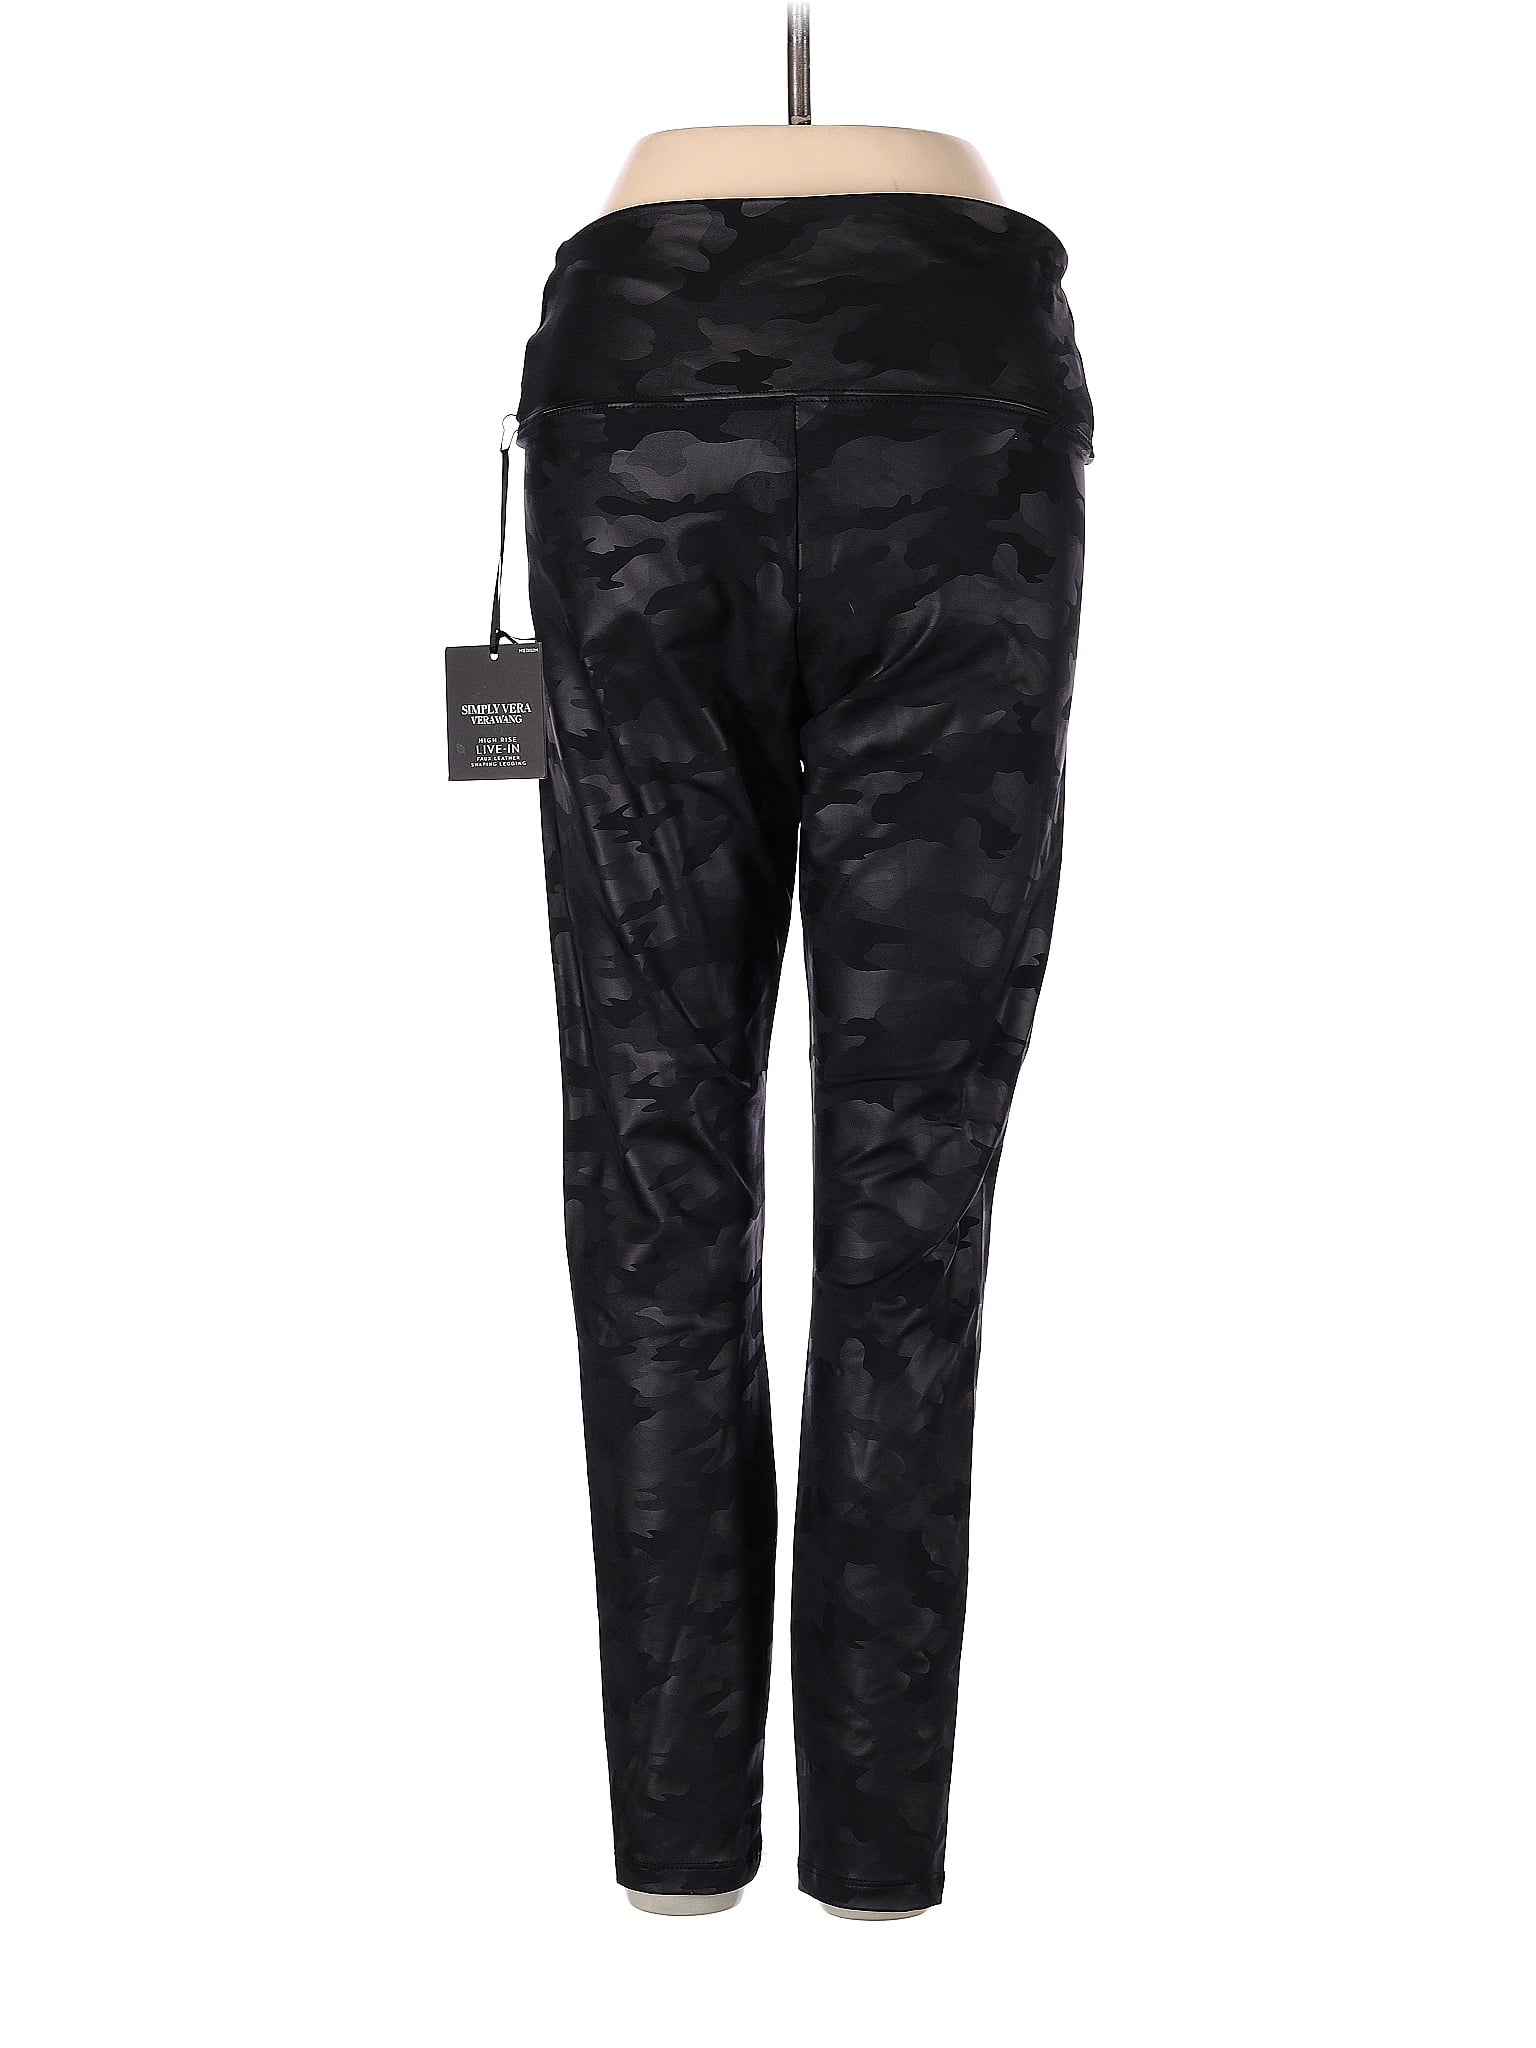 Simply Vera VERA WANG High Rise Live-In Faux Leather Camo Legging